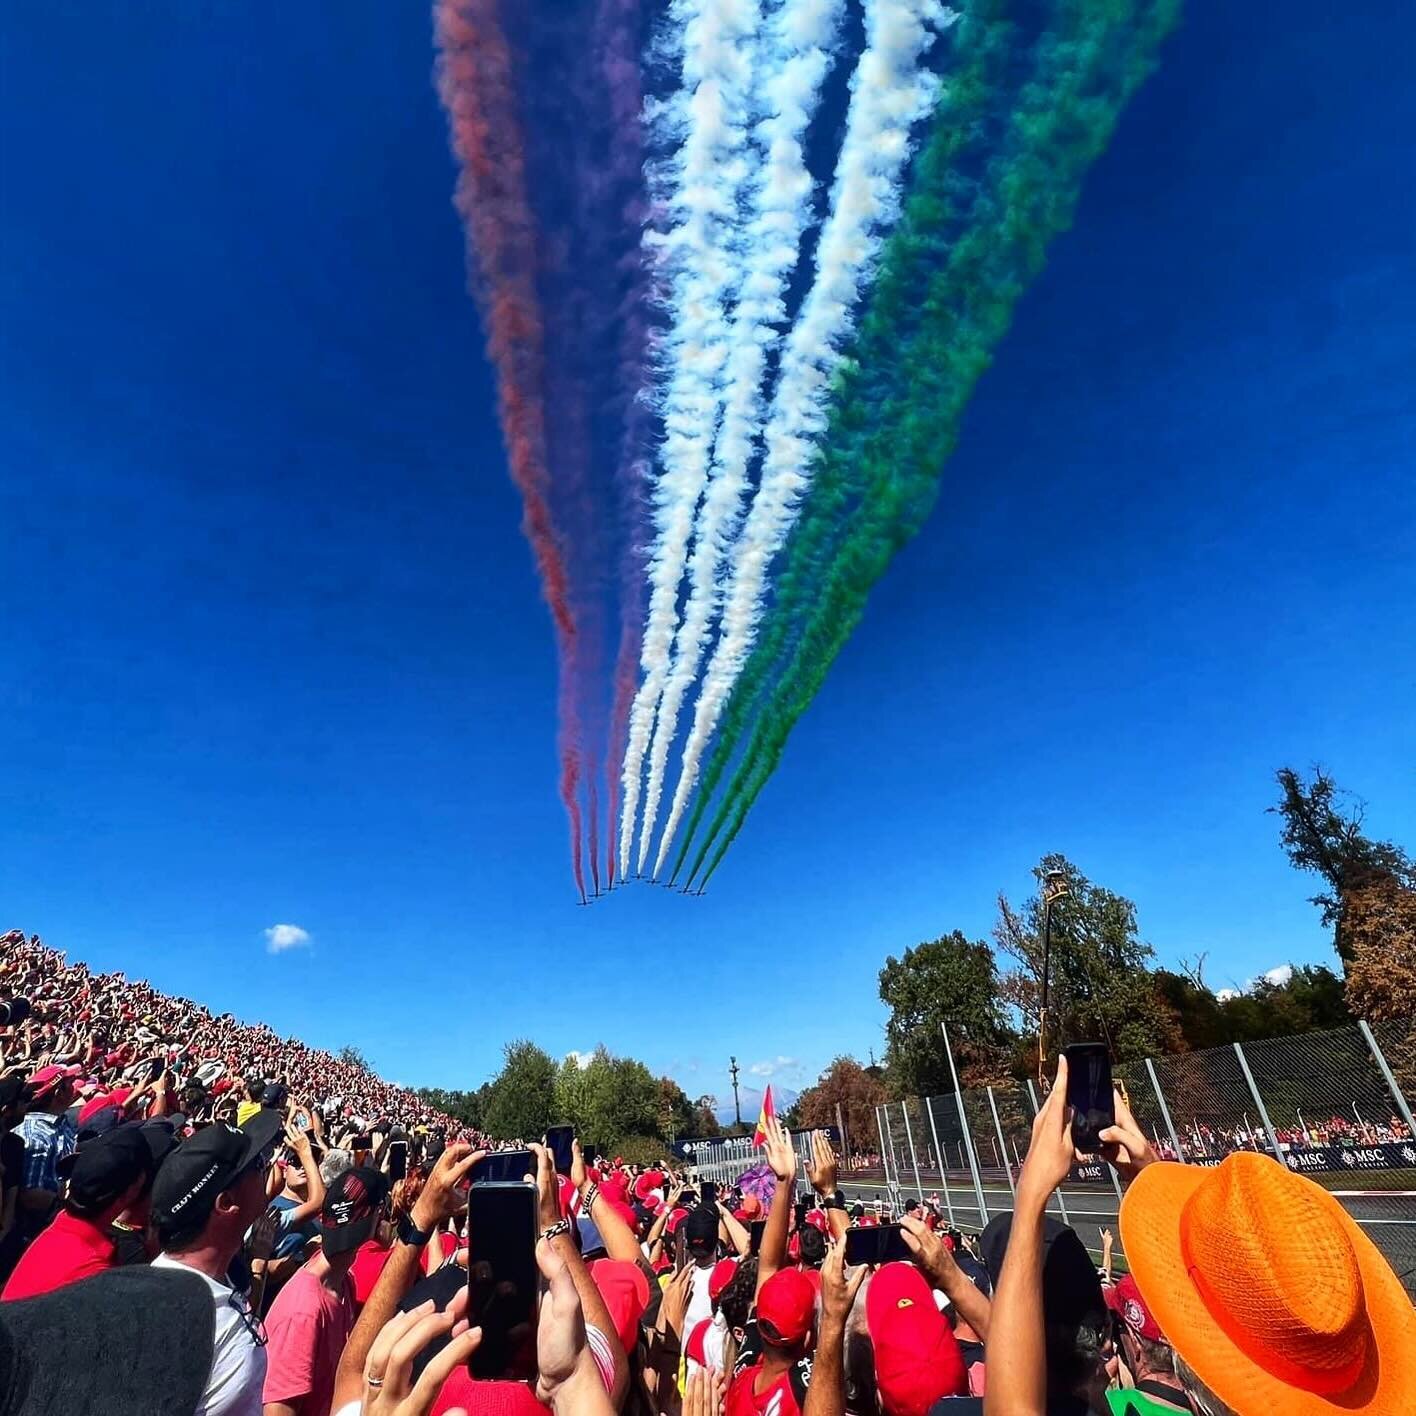 Roaring engines, Italian passion, and a sea of fans at F1 Monza!🏎️🇮🇹 Living the dream with our motorsport family. Join us on the ultimate journey through Italy&rsquo;s racing heartland. 
For more details and to reserve your spot, please visit the 